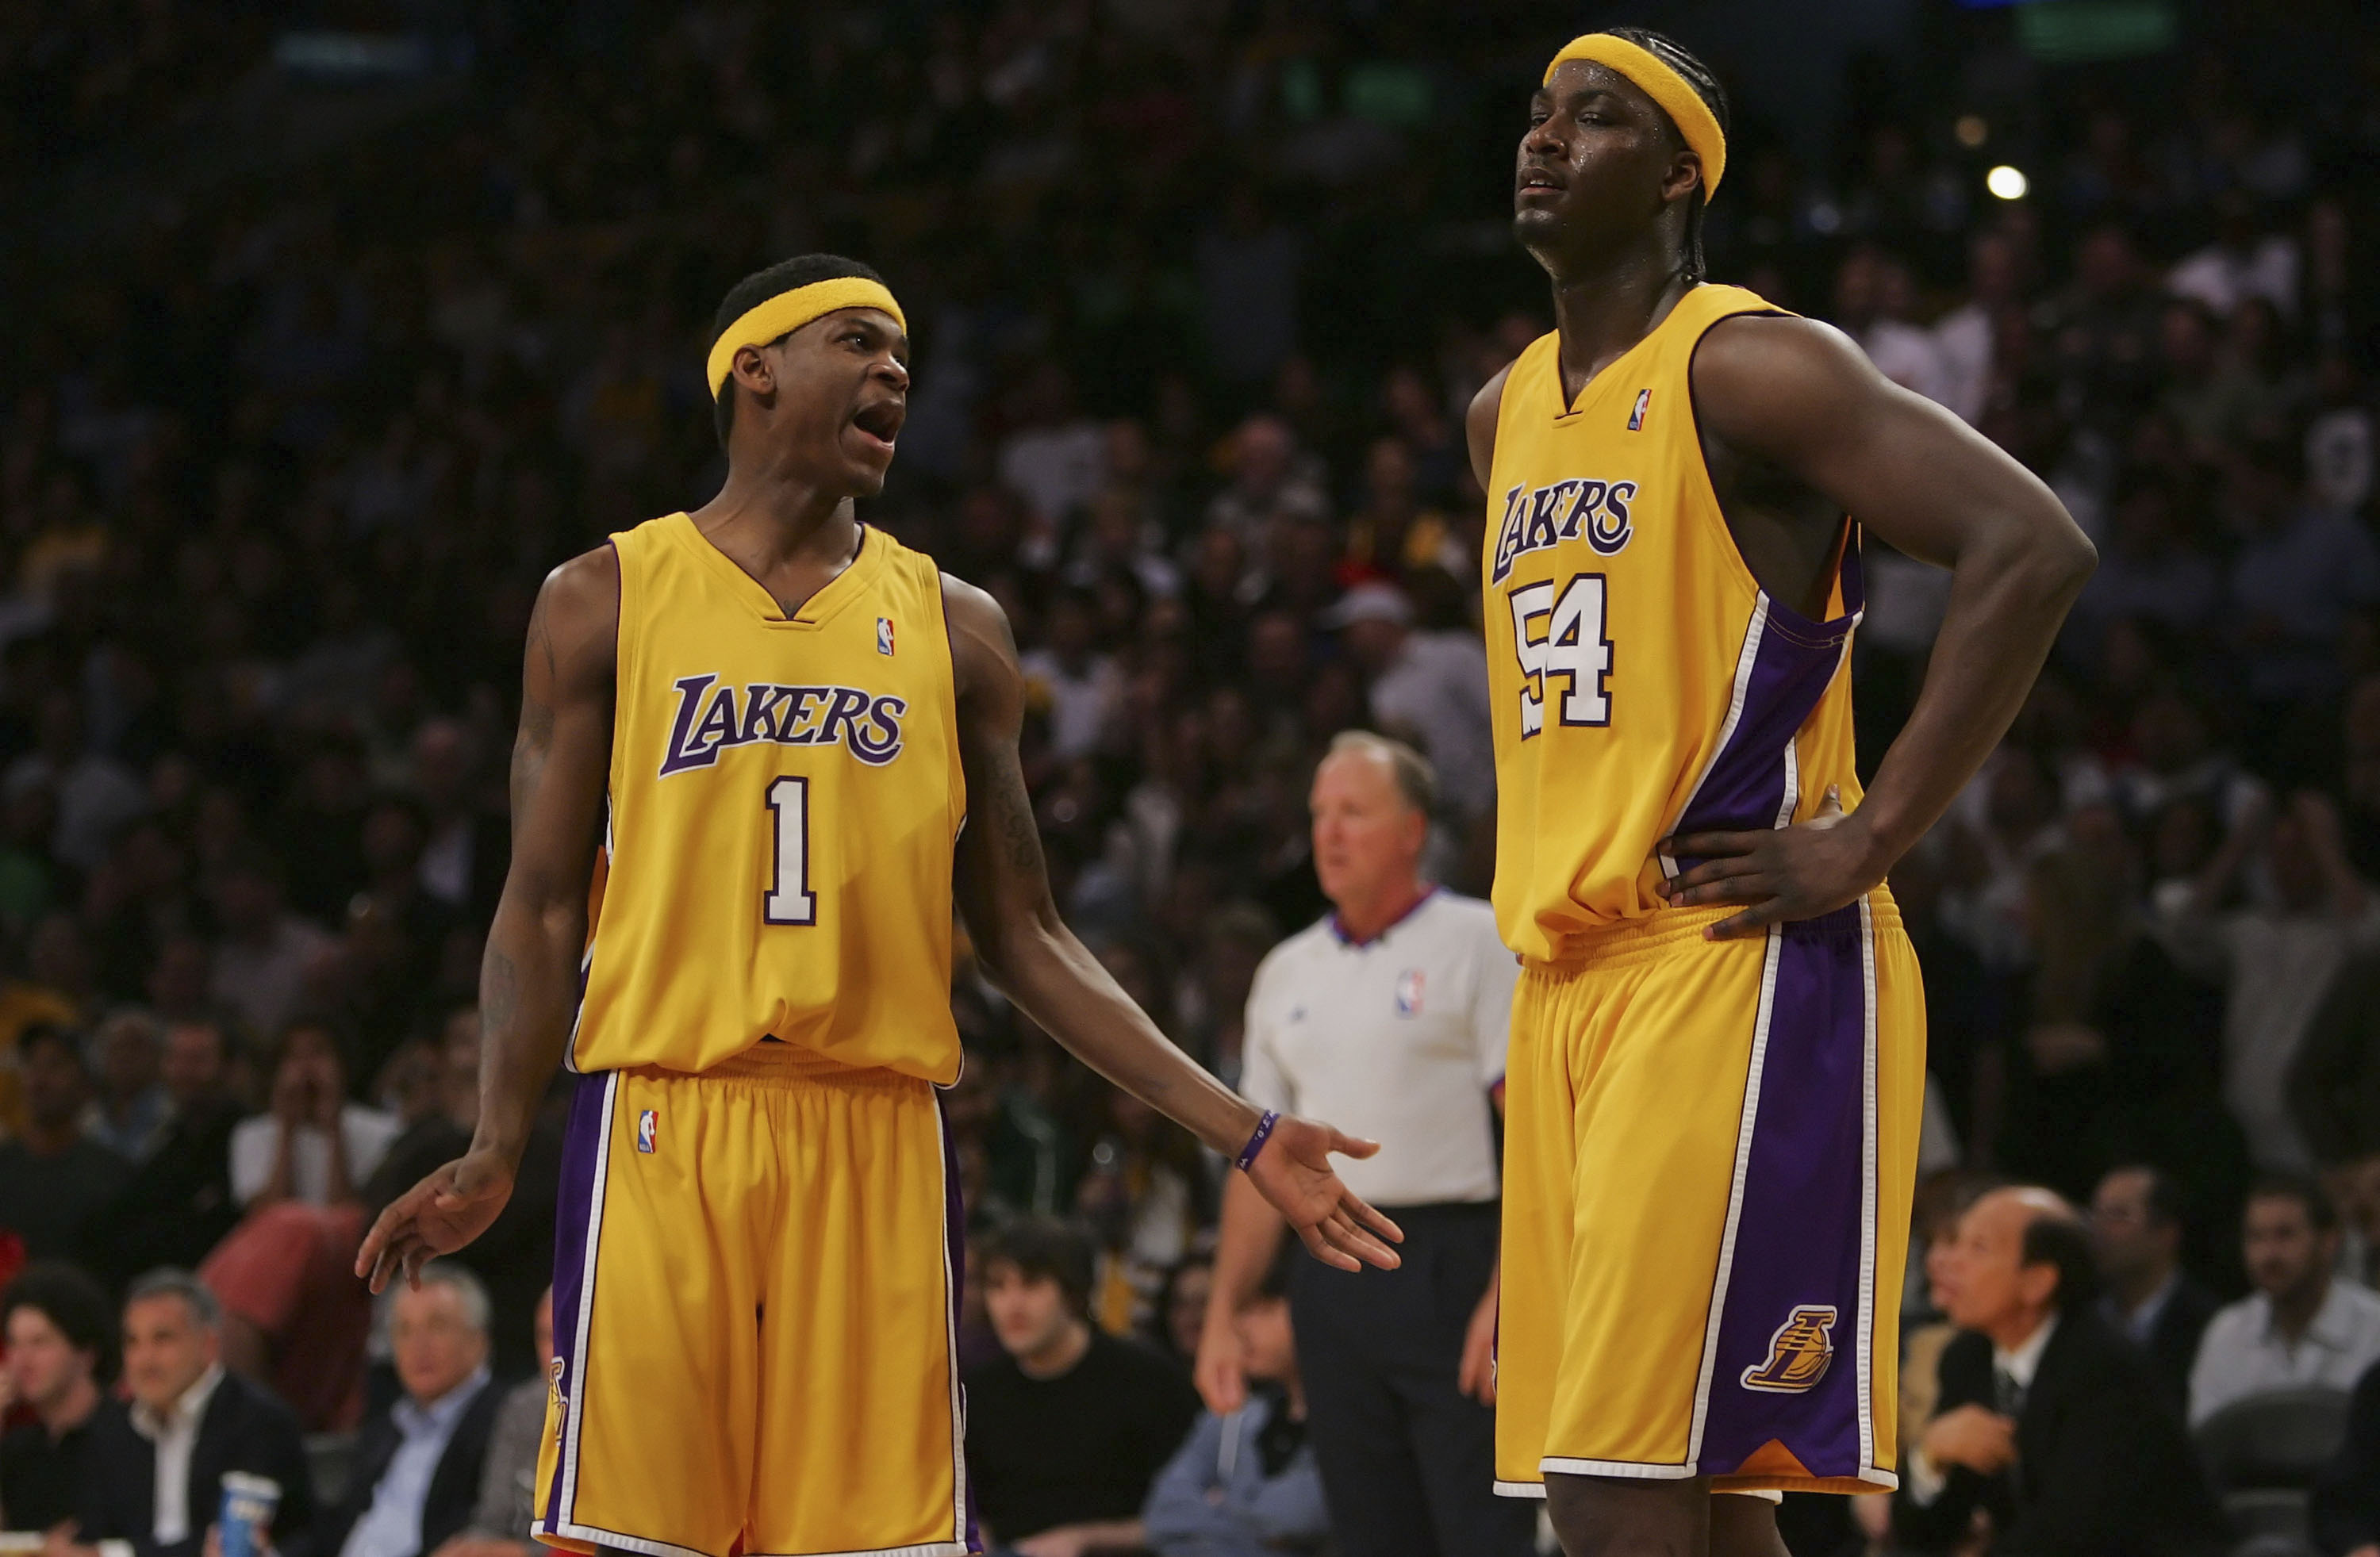 LOS ANGELES, CA - MARCH 30:  (L-R) Smush Parker #1 of the Los Angeles Lakers talks with his teammate Kwame Brown #54 during the game against the Houston Rockets at Staples Center on March 30, 2007 in Los Angeles, California.  NOTE TO USER: User expressly